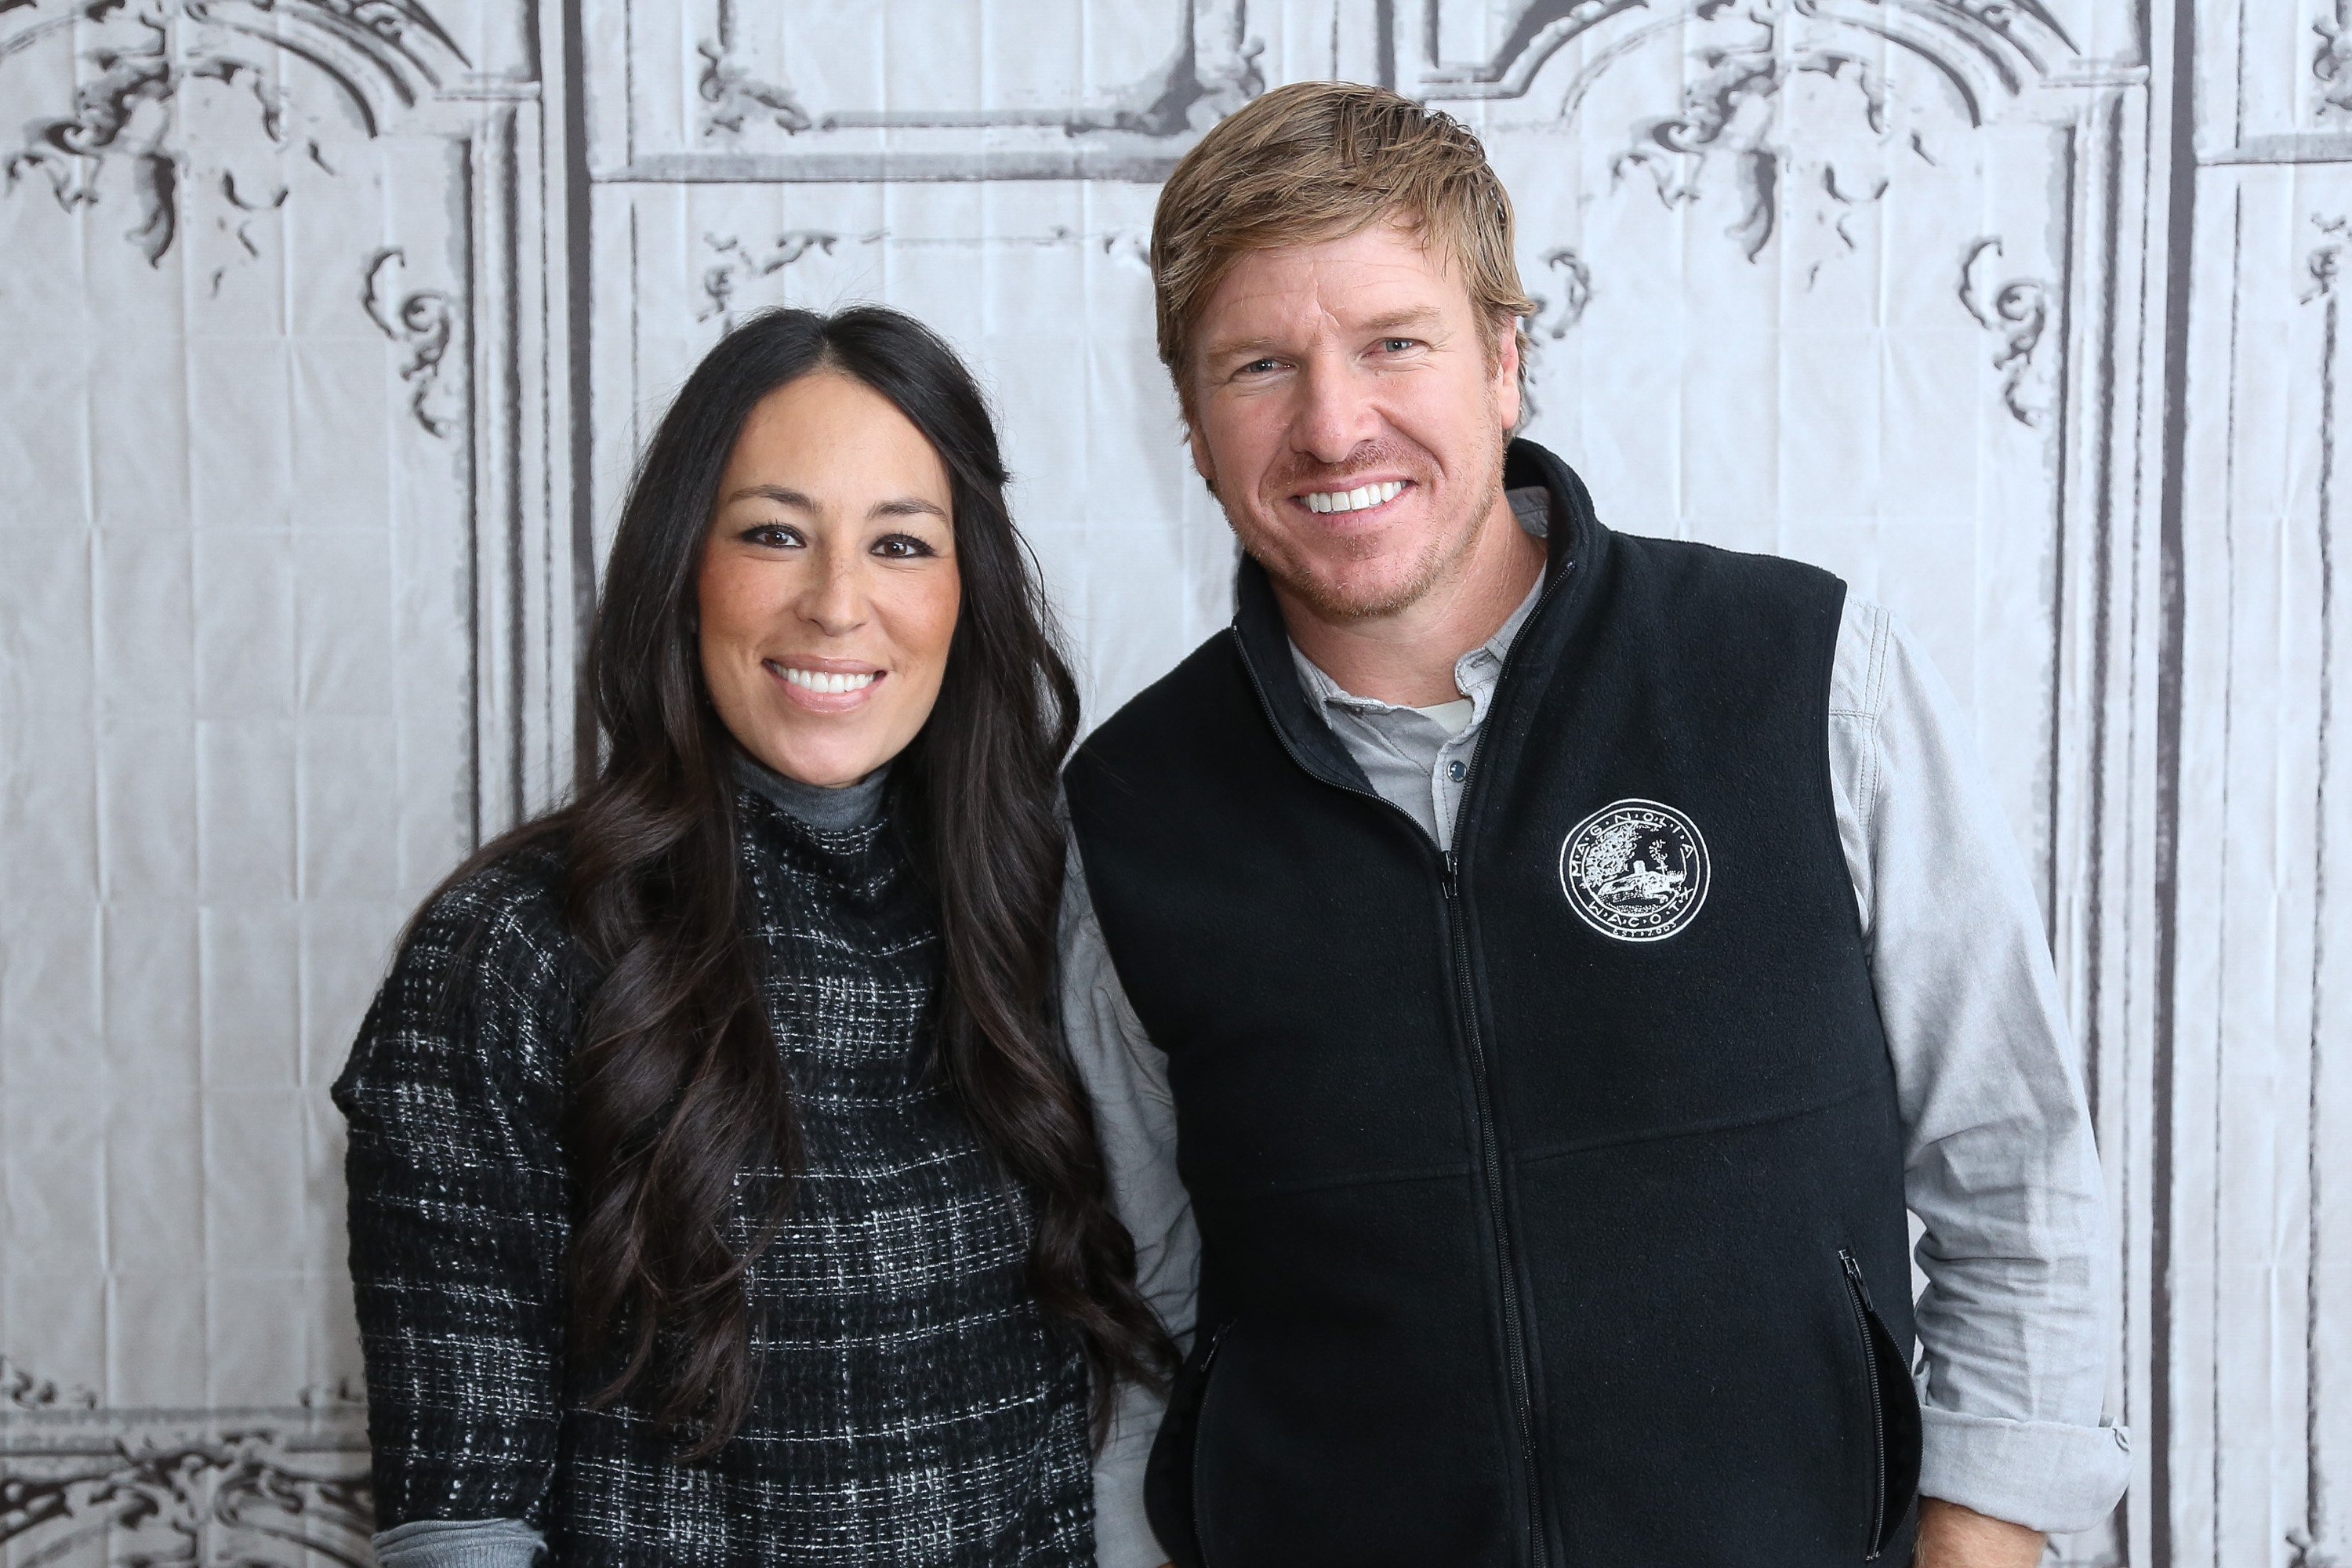 Chip and Joanna Gaines attend AOL Build Presents: "Fixer Upper" at AOL Studios In New York on December 8, 2015. | Photo: GettyImages